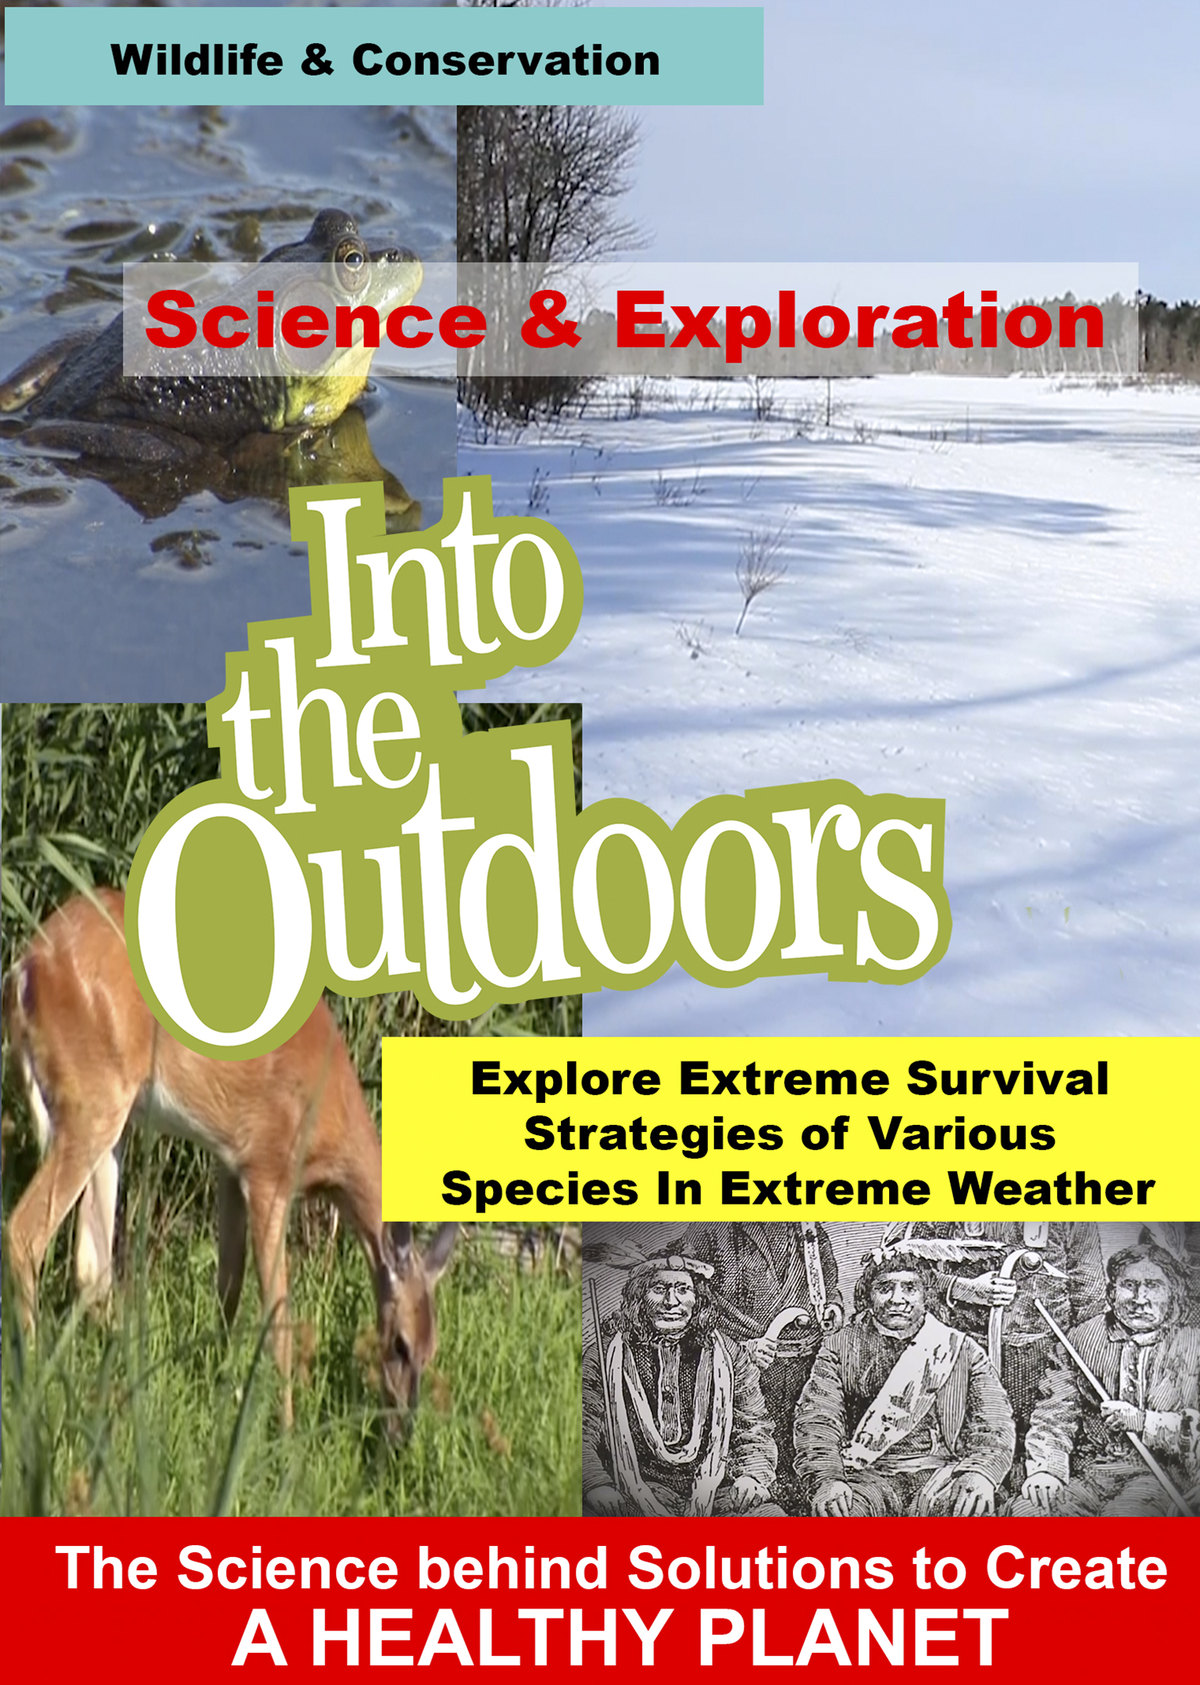 K4970 - Explore Extreme Survival Strategies of Various Species In Extreme Weather